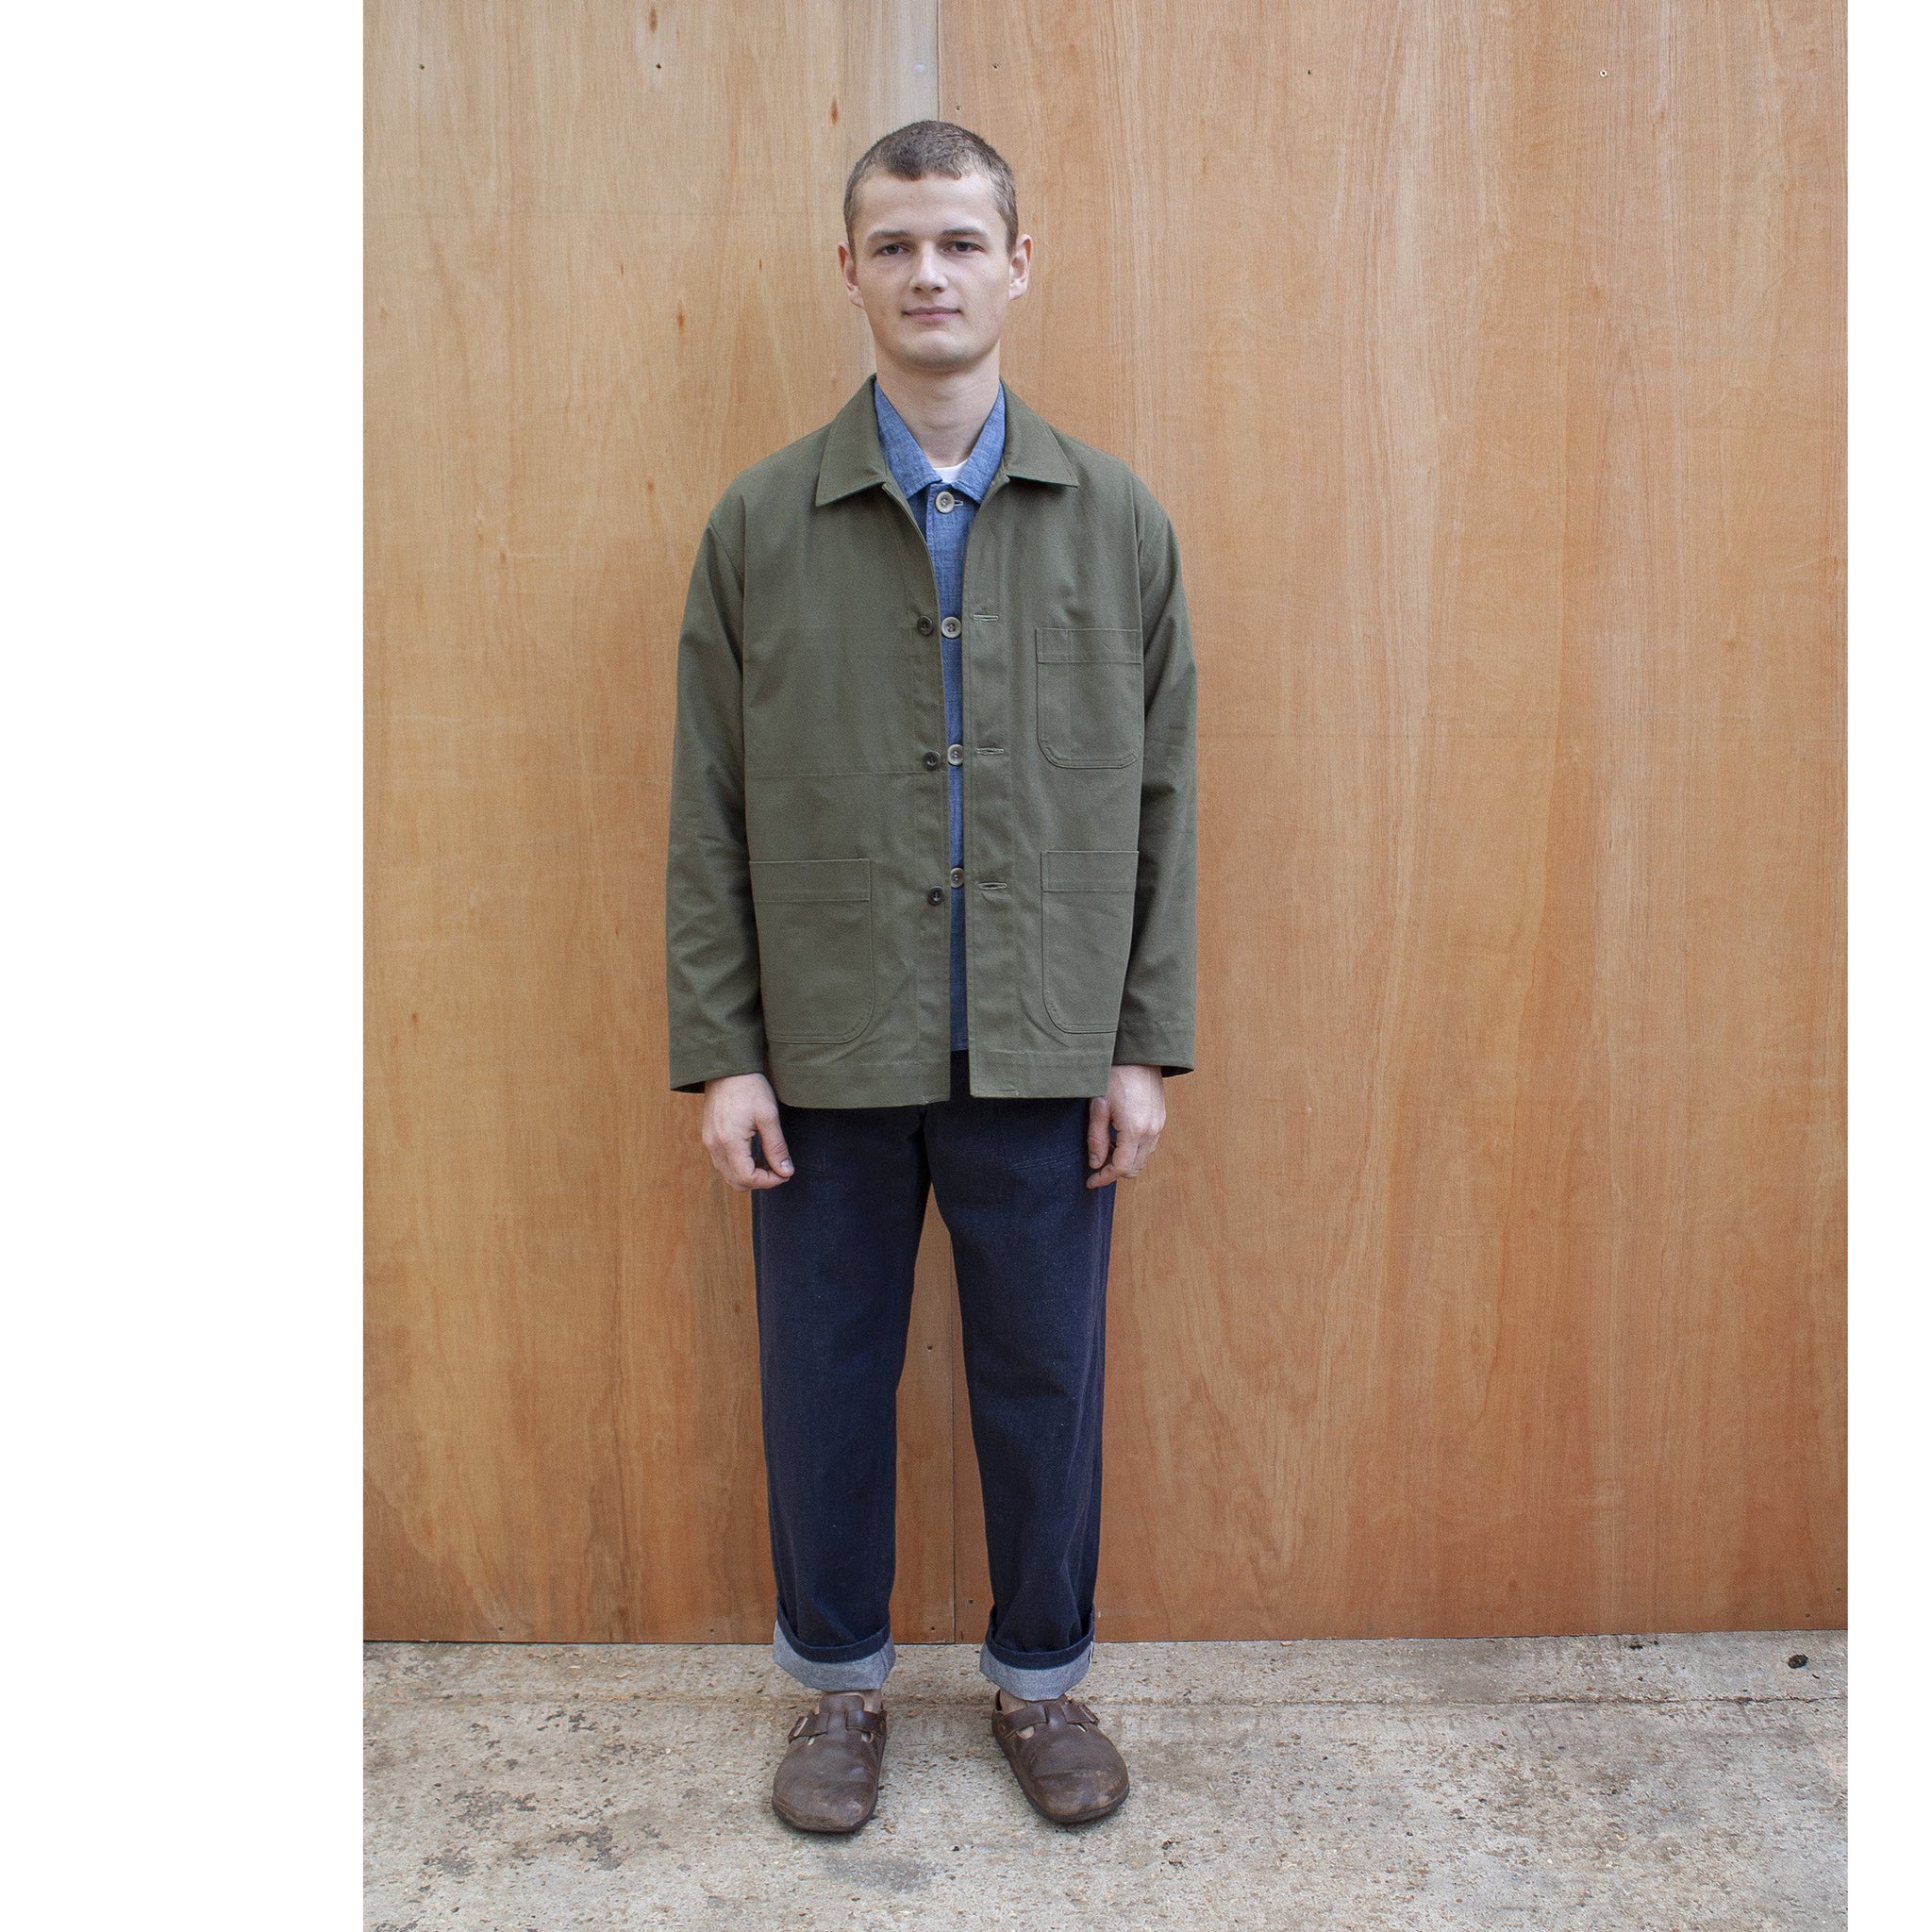 a young man standing against a wooden wall wearing a traditional chore jacket made in a sage green brushed cotton canvas